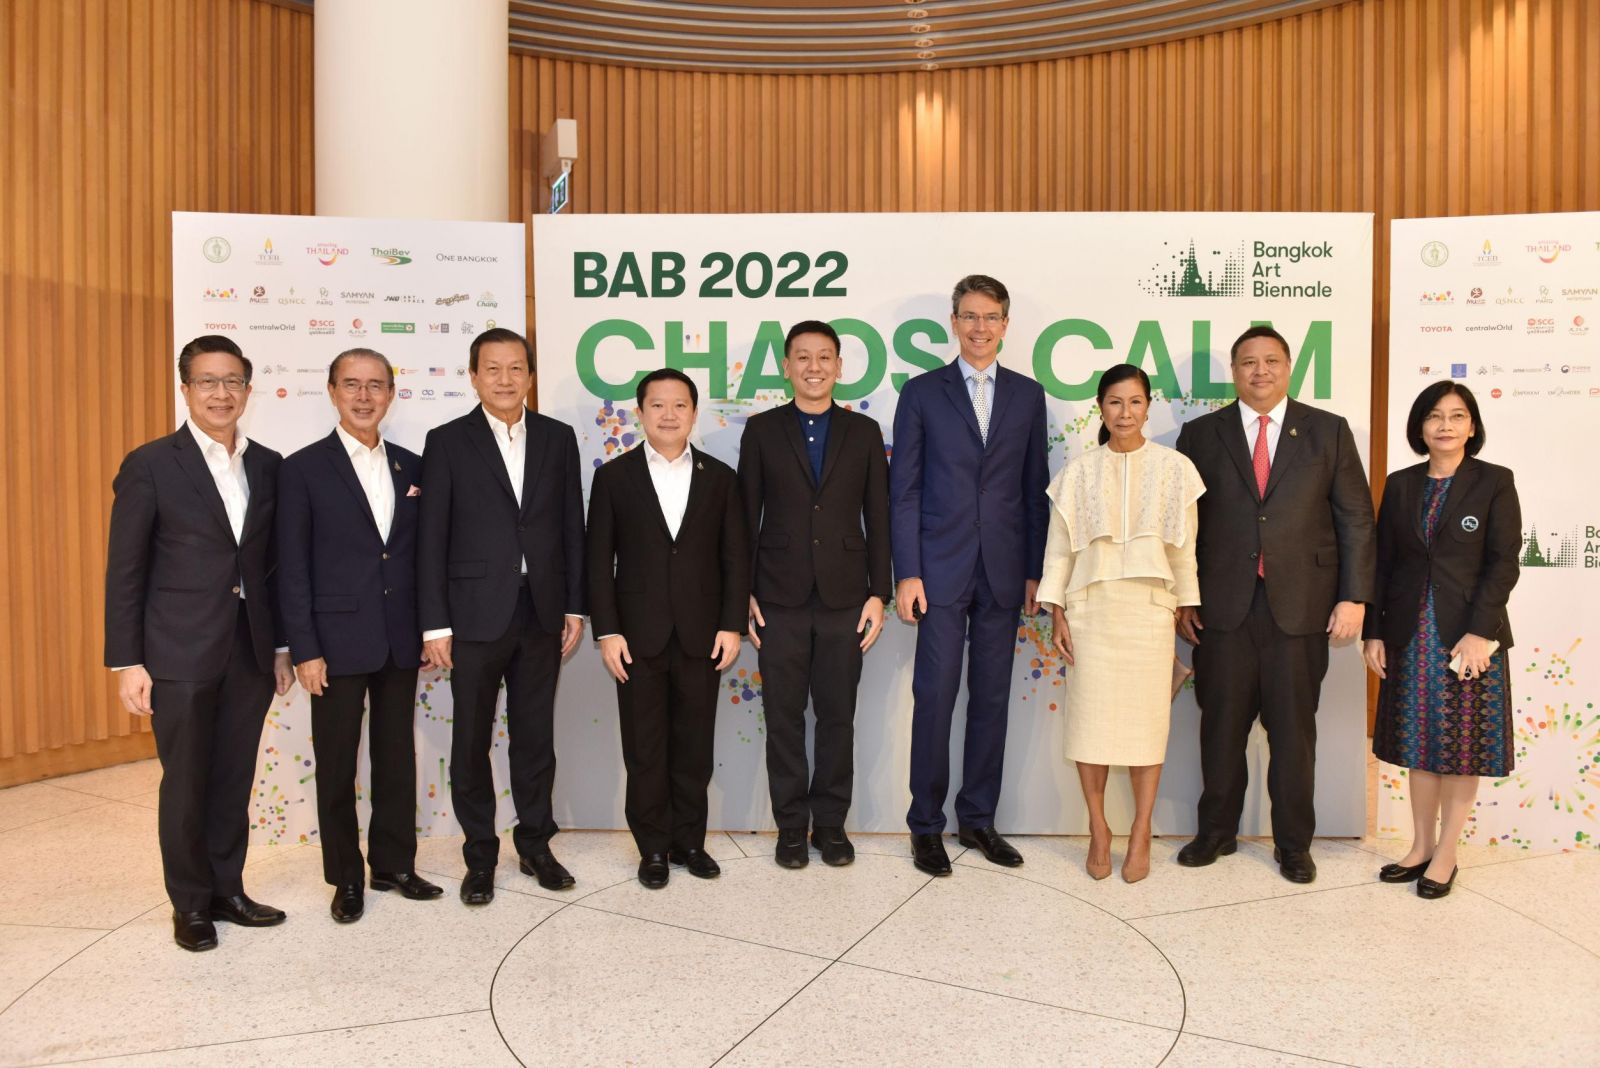 BAB Foundation in collaboration with BMA announced BAB 2022